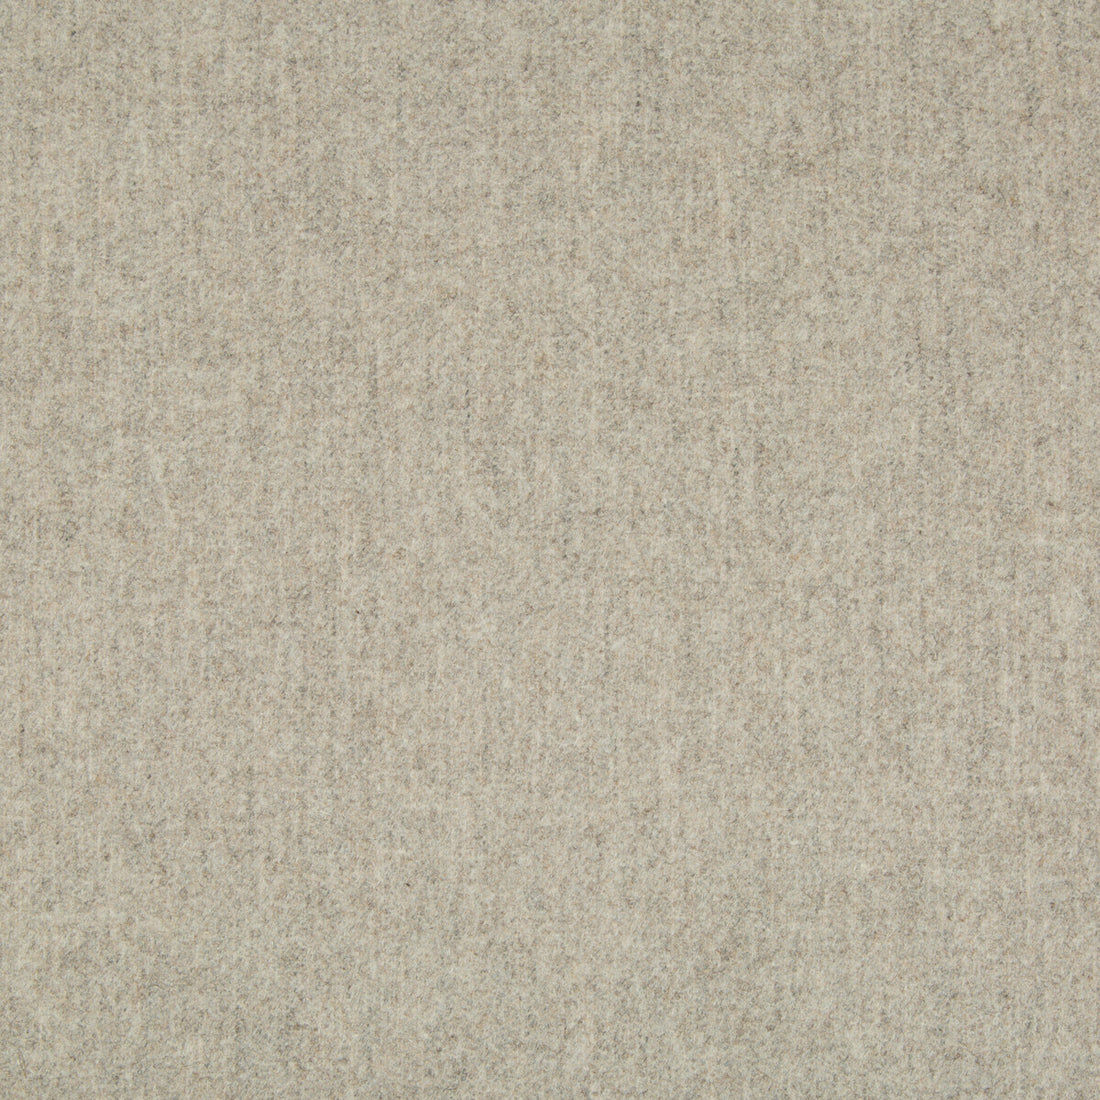 Lucky Suit fabric in oatmeal color - pattern 34903.106.0 - by Kravet Couture in the Modern Tailor collection